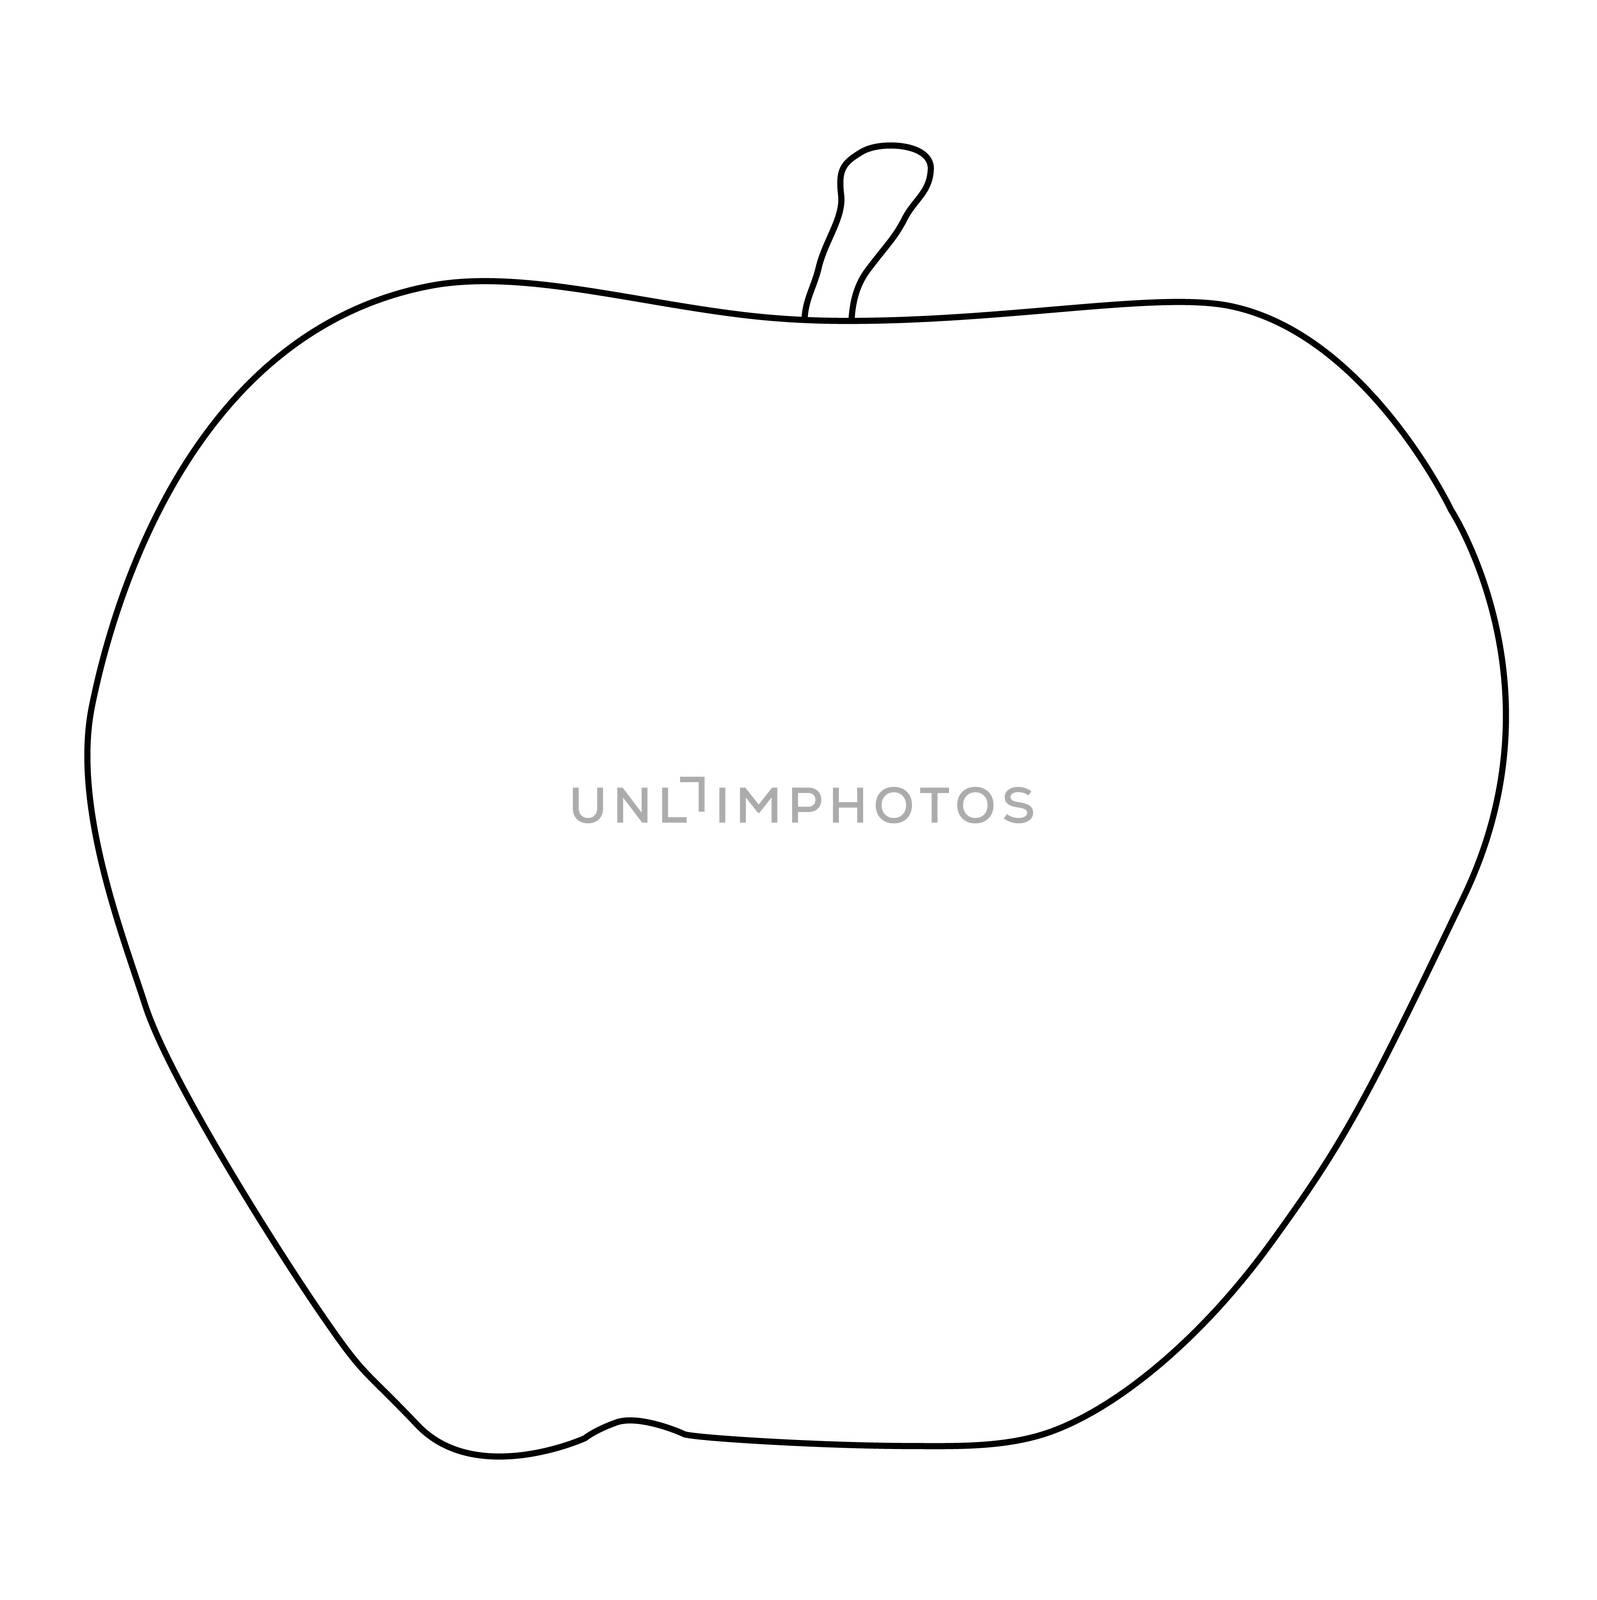 An apple black outline drawing isolated on a white background